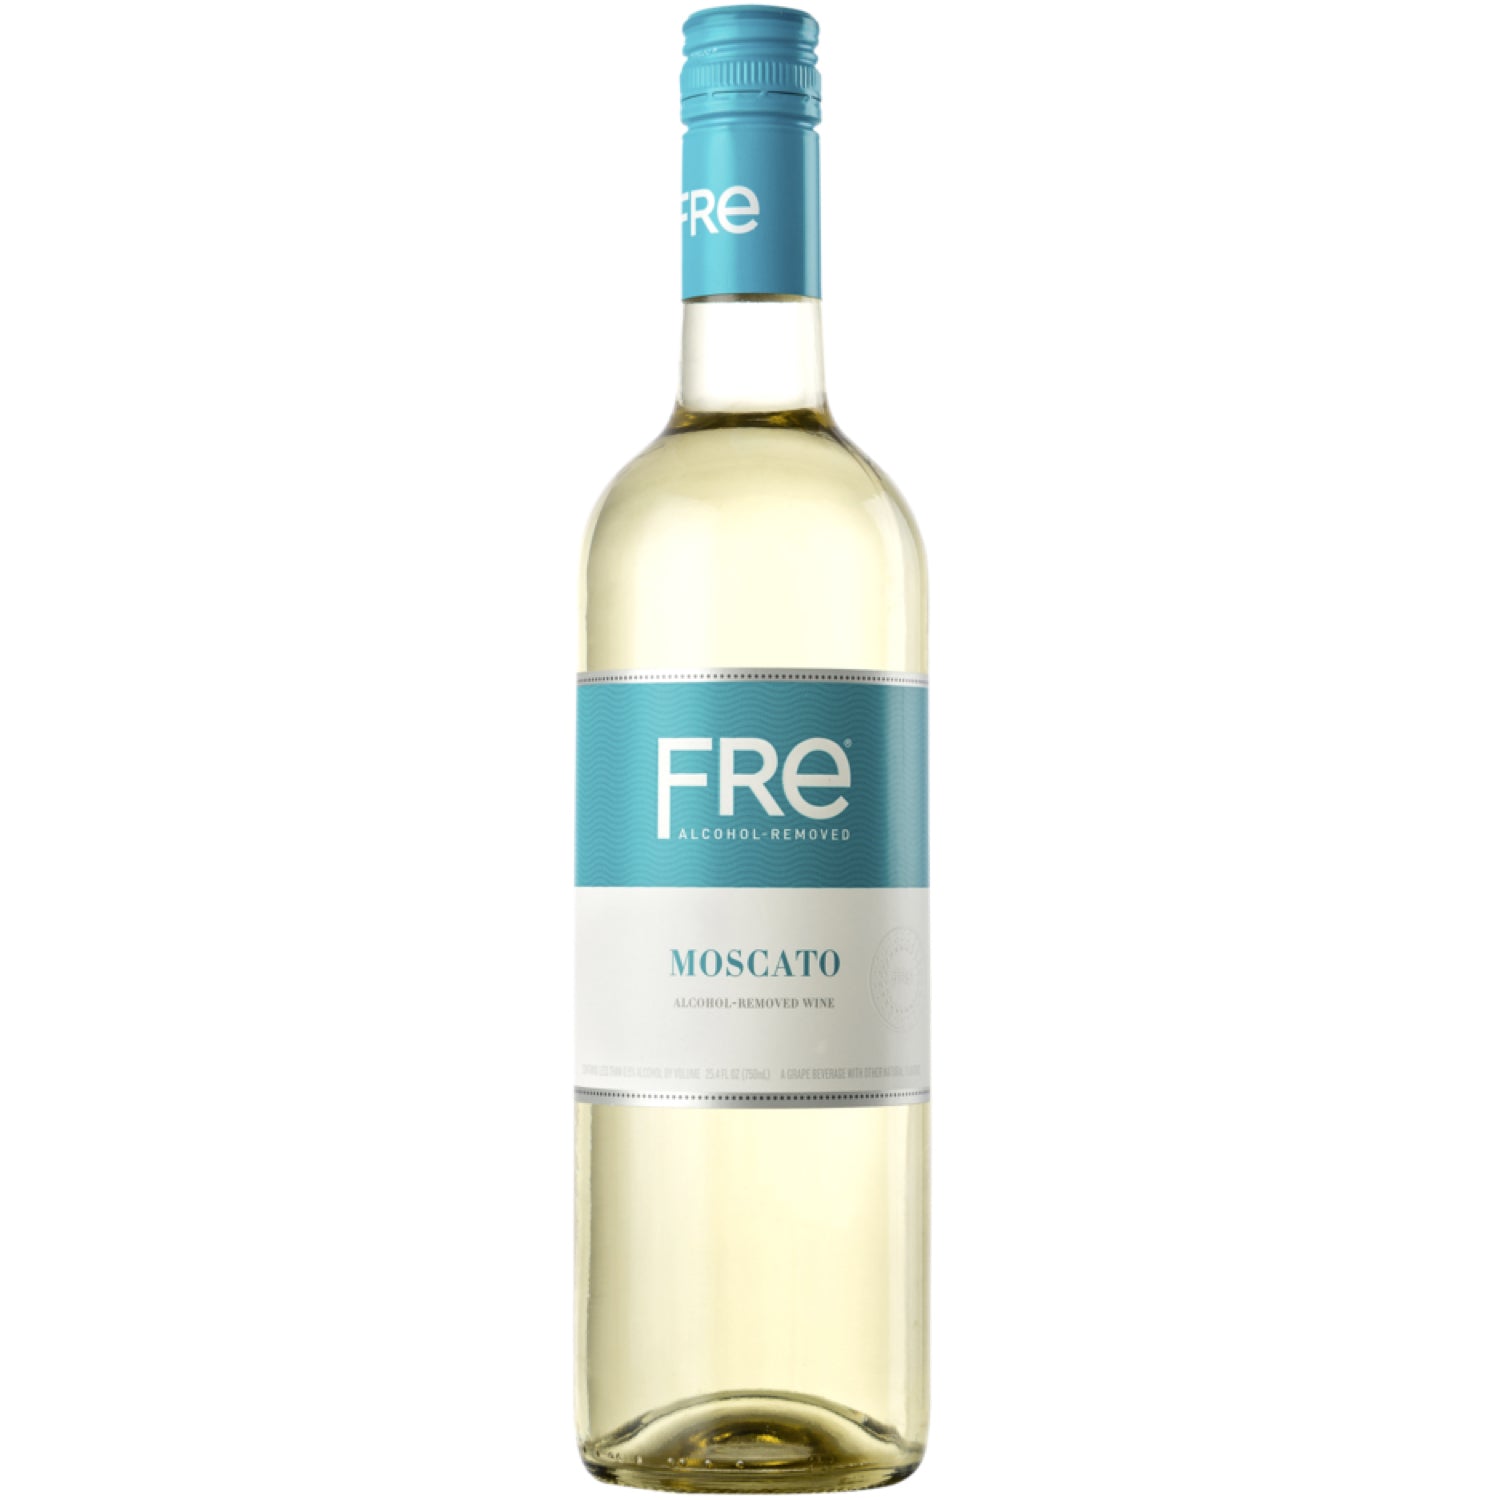 Fre Moscato 0.5% Alcohol [750ml]